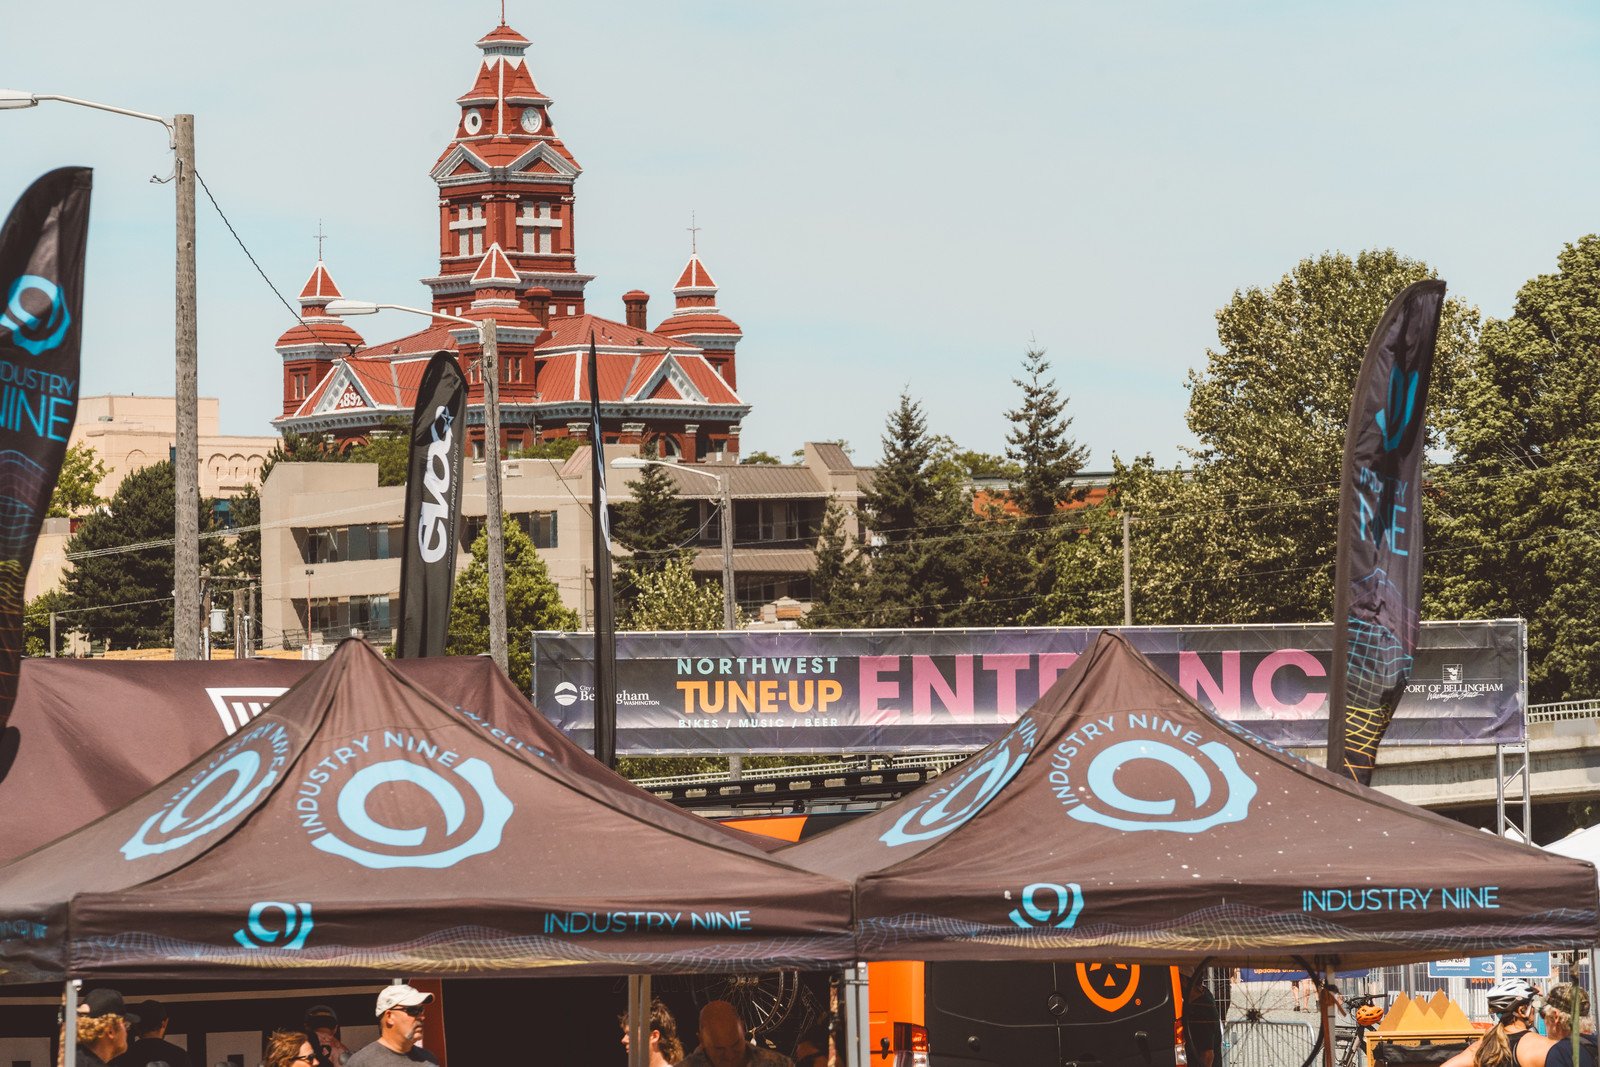 The NW Tune-up Festival Is the Ultimate PNW Fantasy With Over 60 Brands and 20 Live Bands